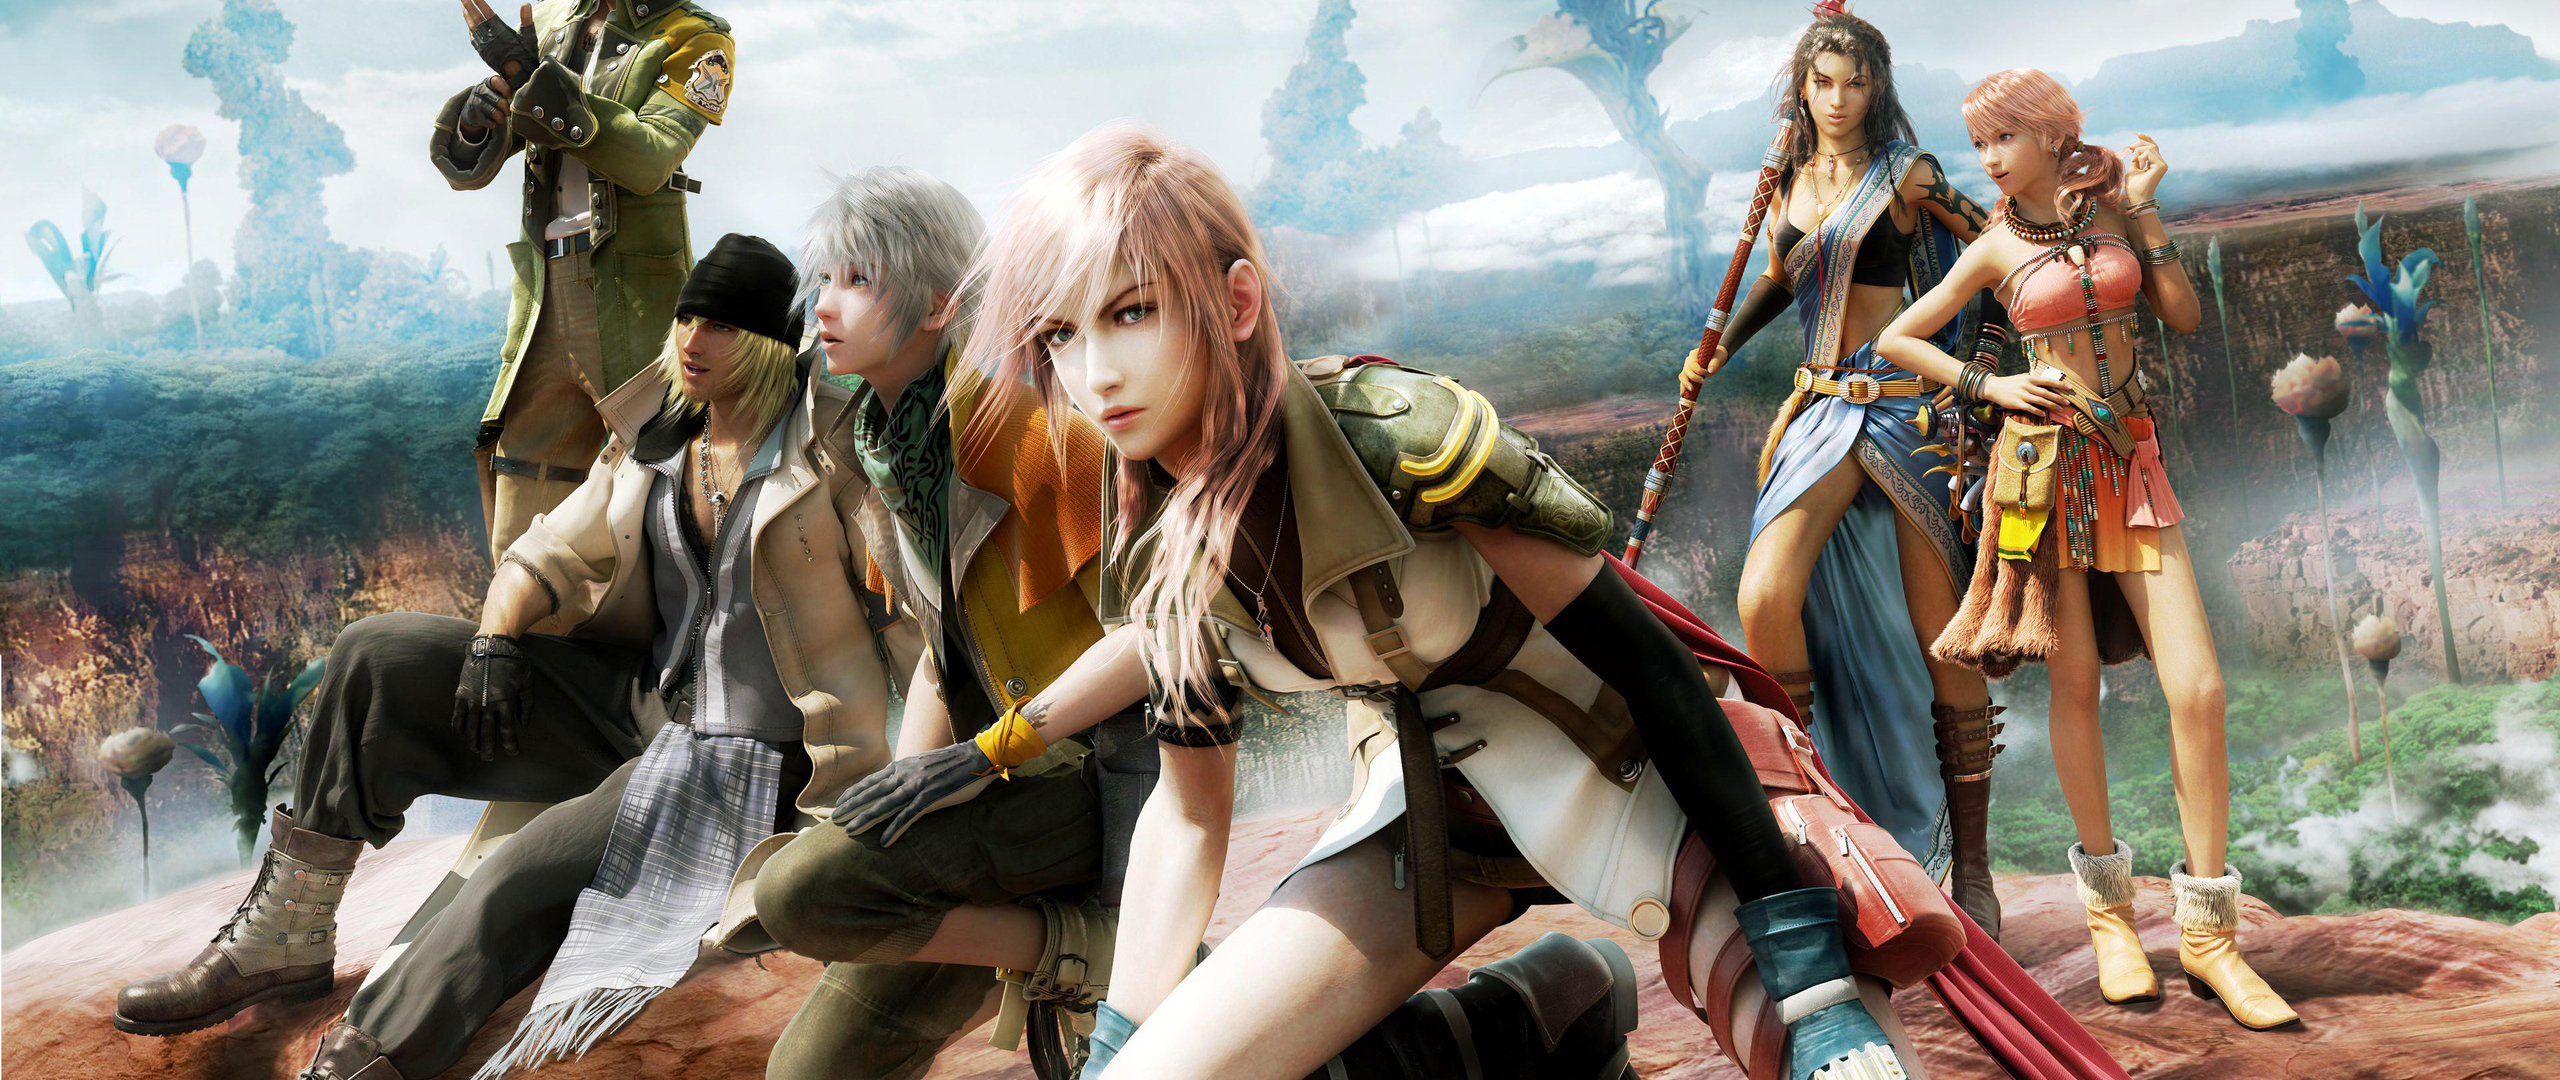 2560x1080 Final Fantasy Xiii 4k 2560x1080 Resolution Hd 4k Wallpapers Images Backgrounds Photos And Pictures